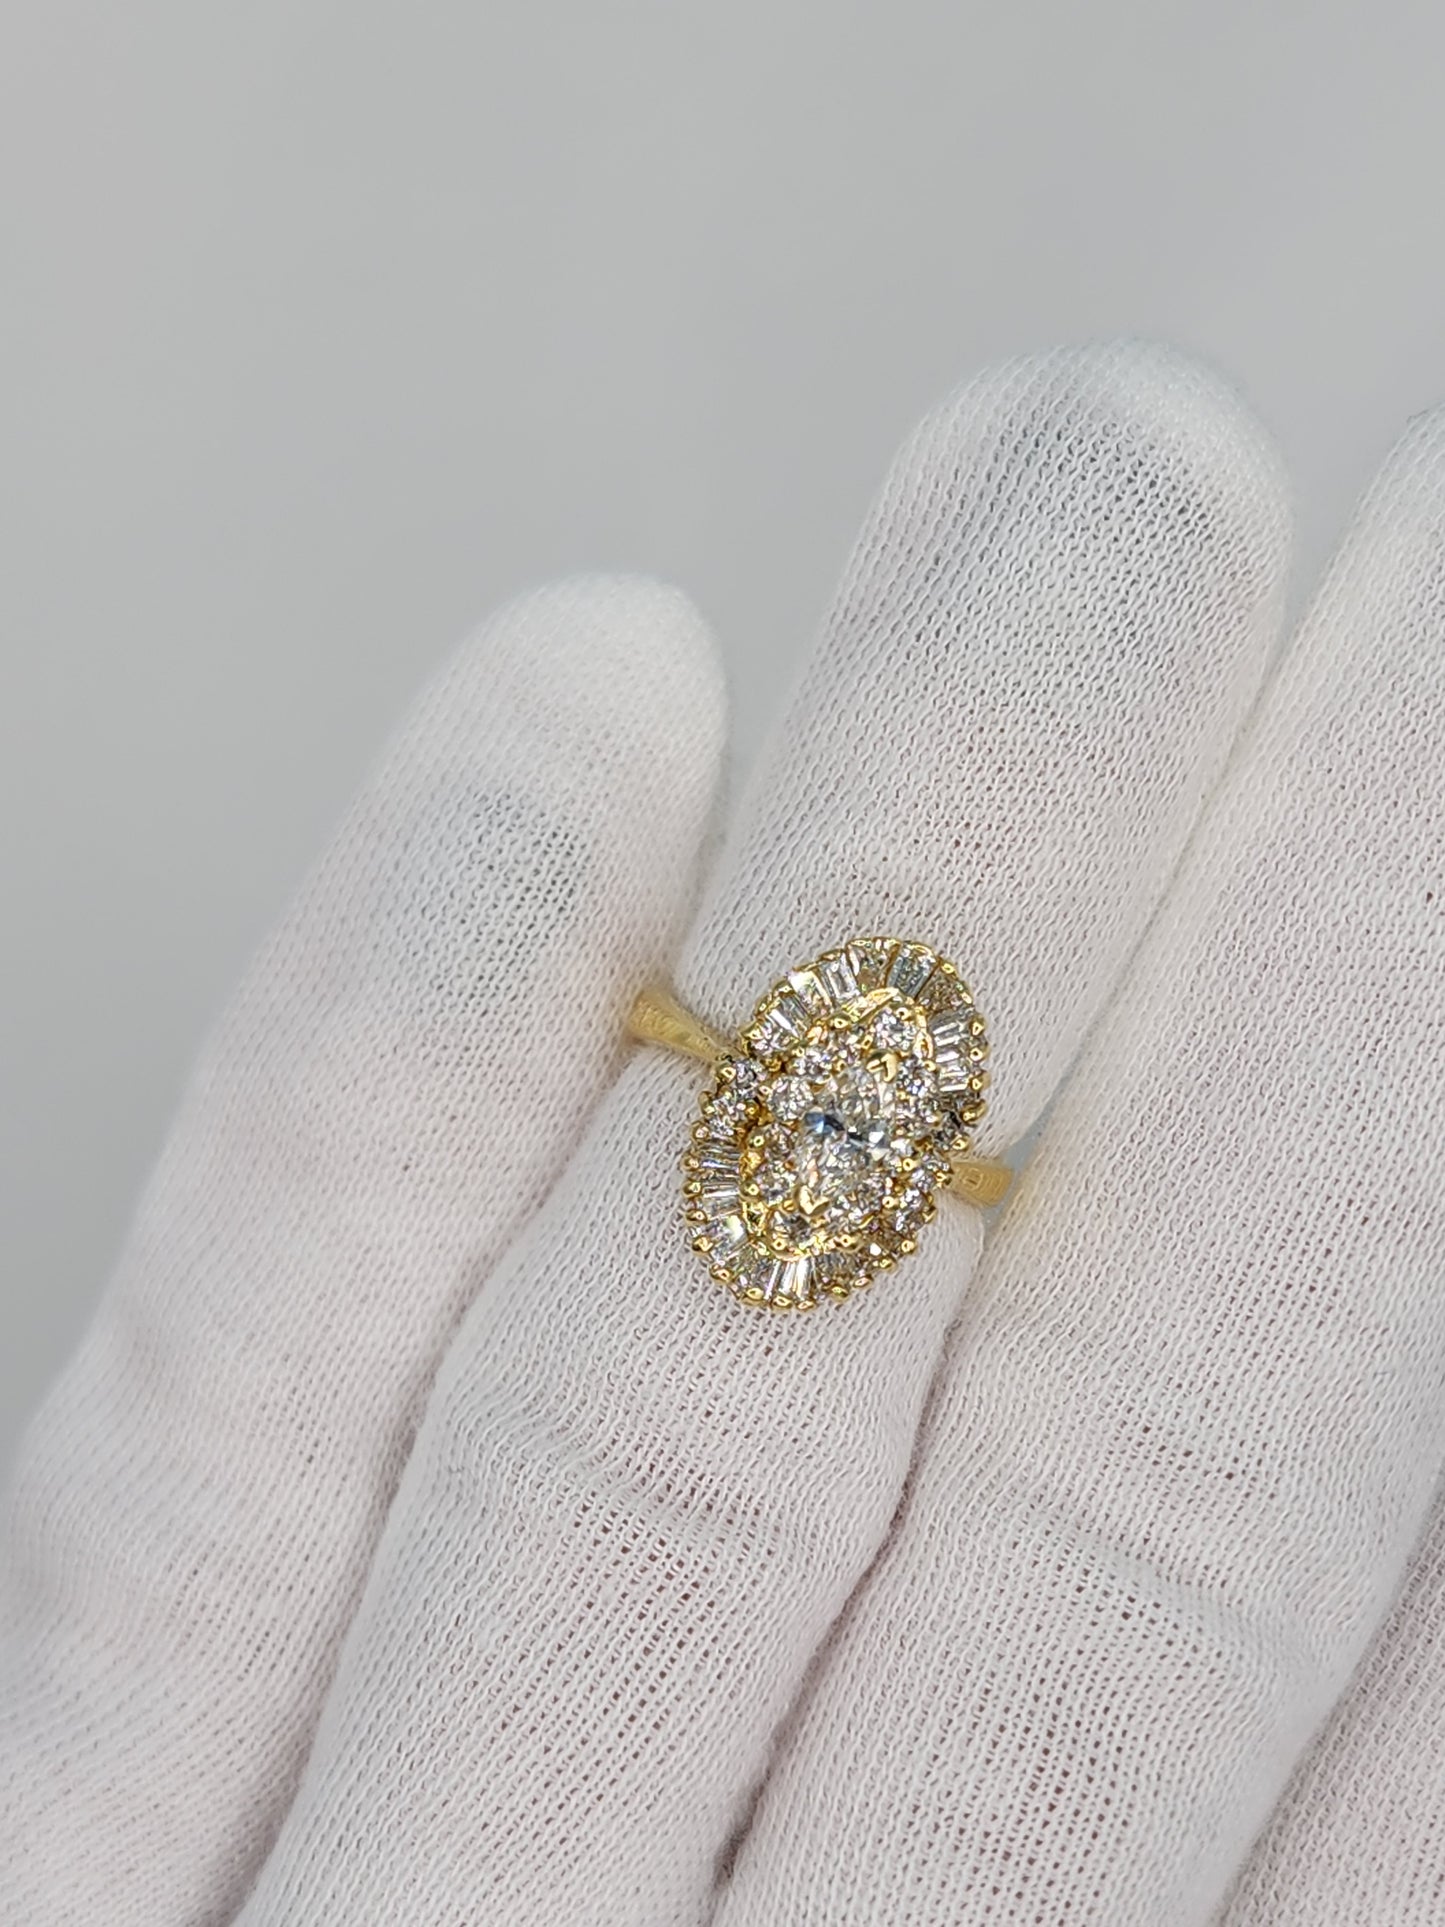 Ballerina Style Marquise Diamond Double Starburst Frame Engagement Ring in 18k Yellow Gold